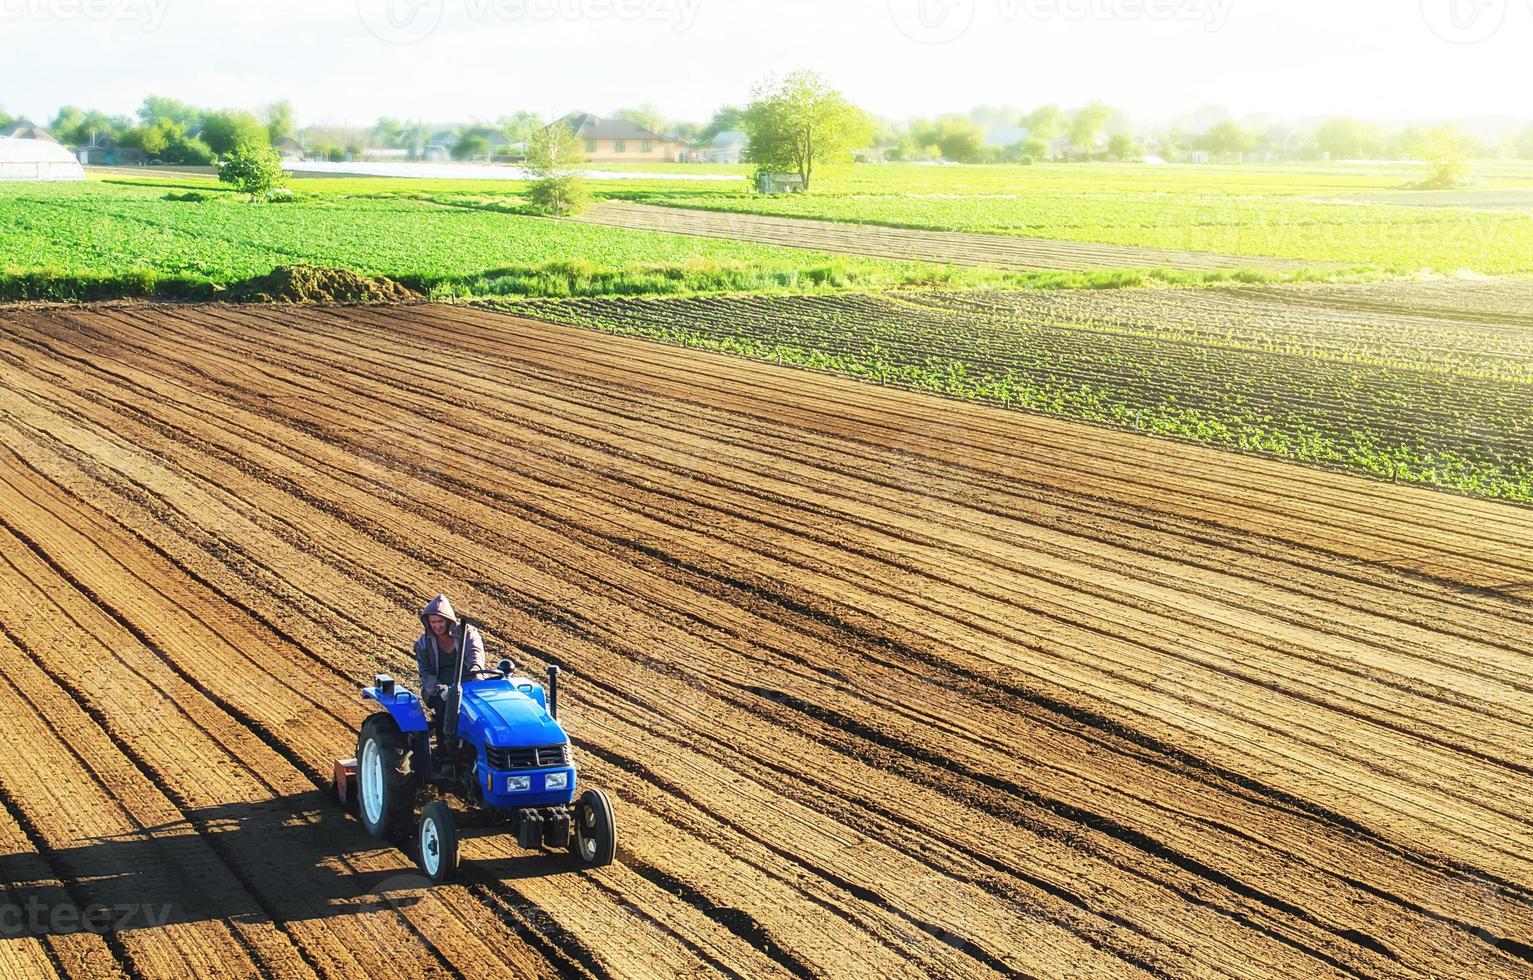 Farmer on a tractor cultivates a farm field. Grinding and loosening soil, removing plants and roots from past harvest. Cultivating land for further planting. Food production on vegetable plantations. photo